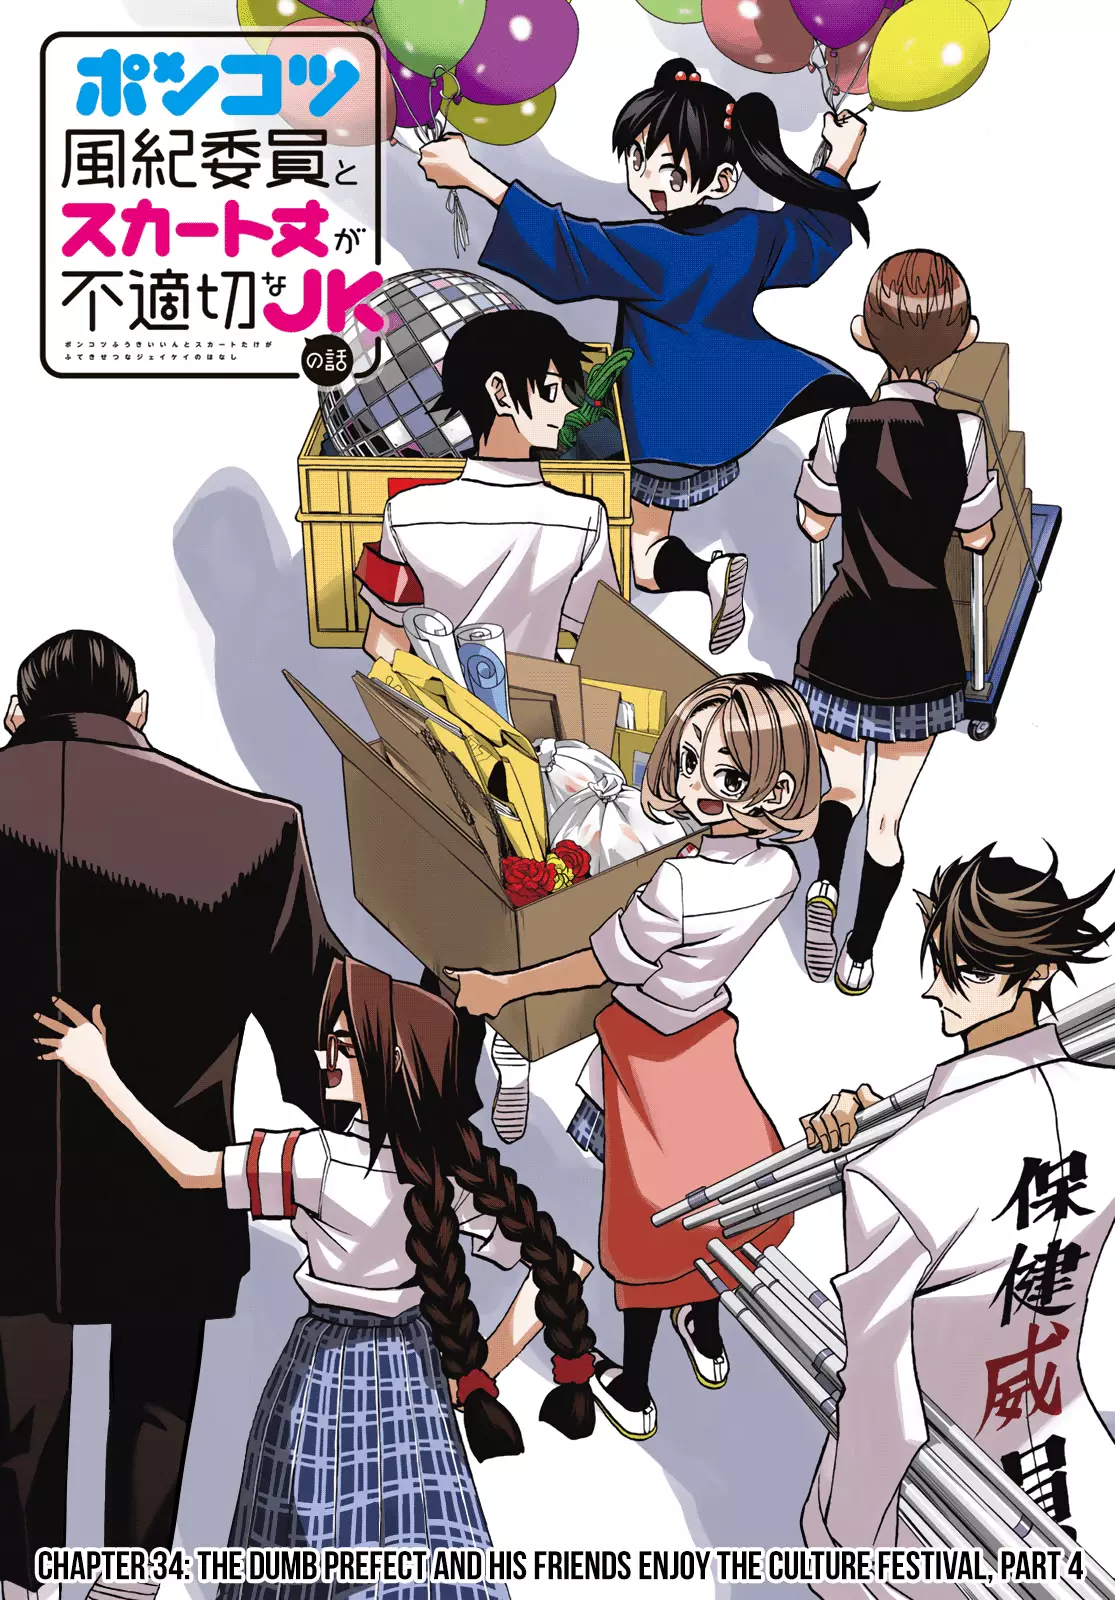 The Story Between A Dumb Prefect And A High School Girl With An Inappropriate Skirt Length - 34 page 2